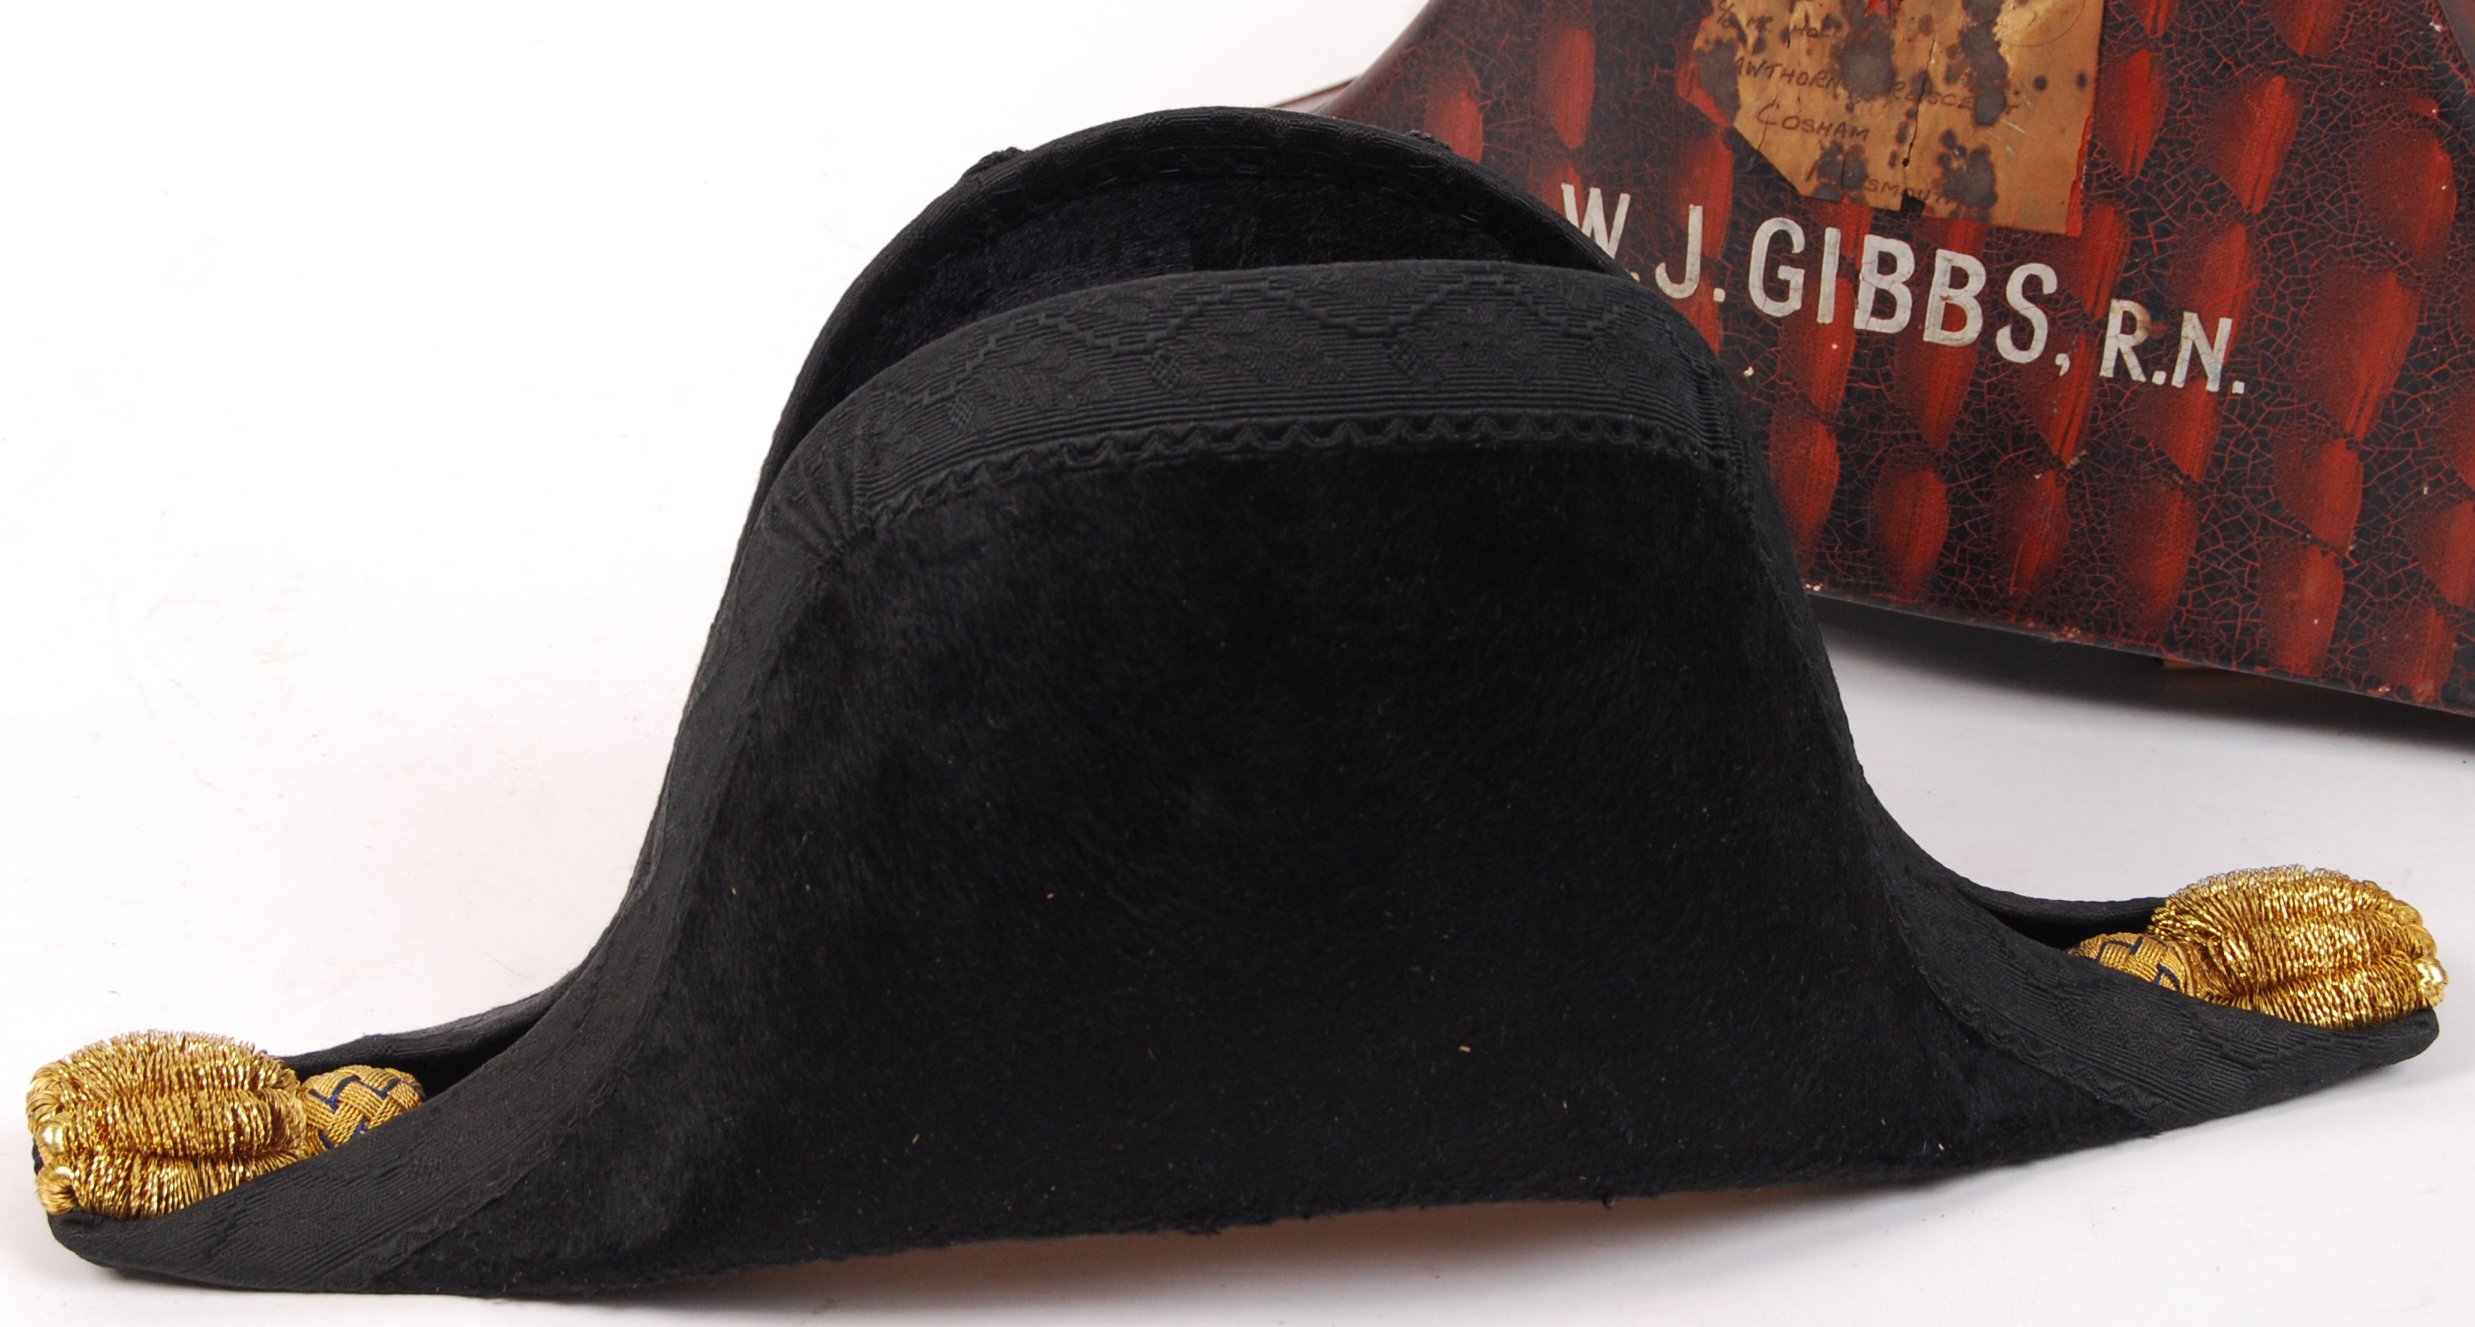 EARLY 20TH CENTURY NAVAL BICORN HAT - Image 4 of 8